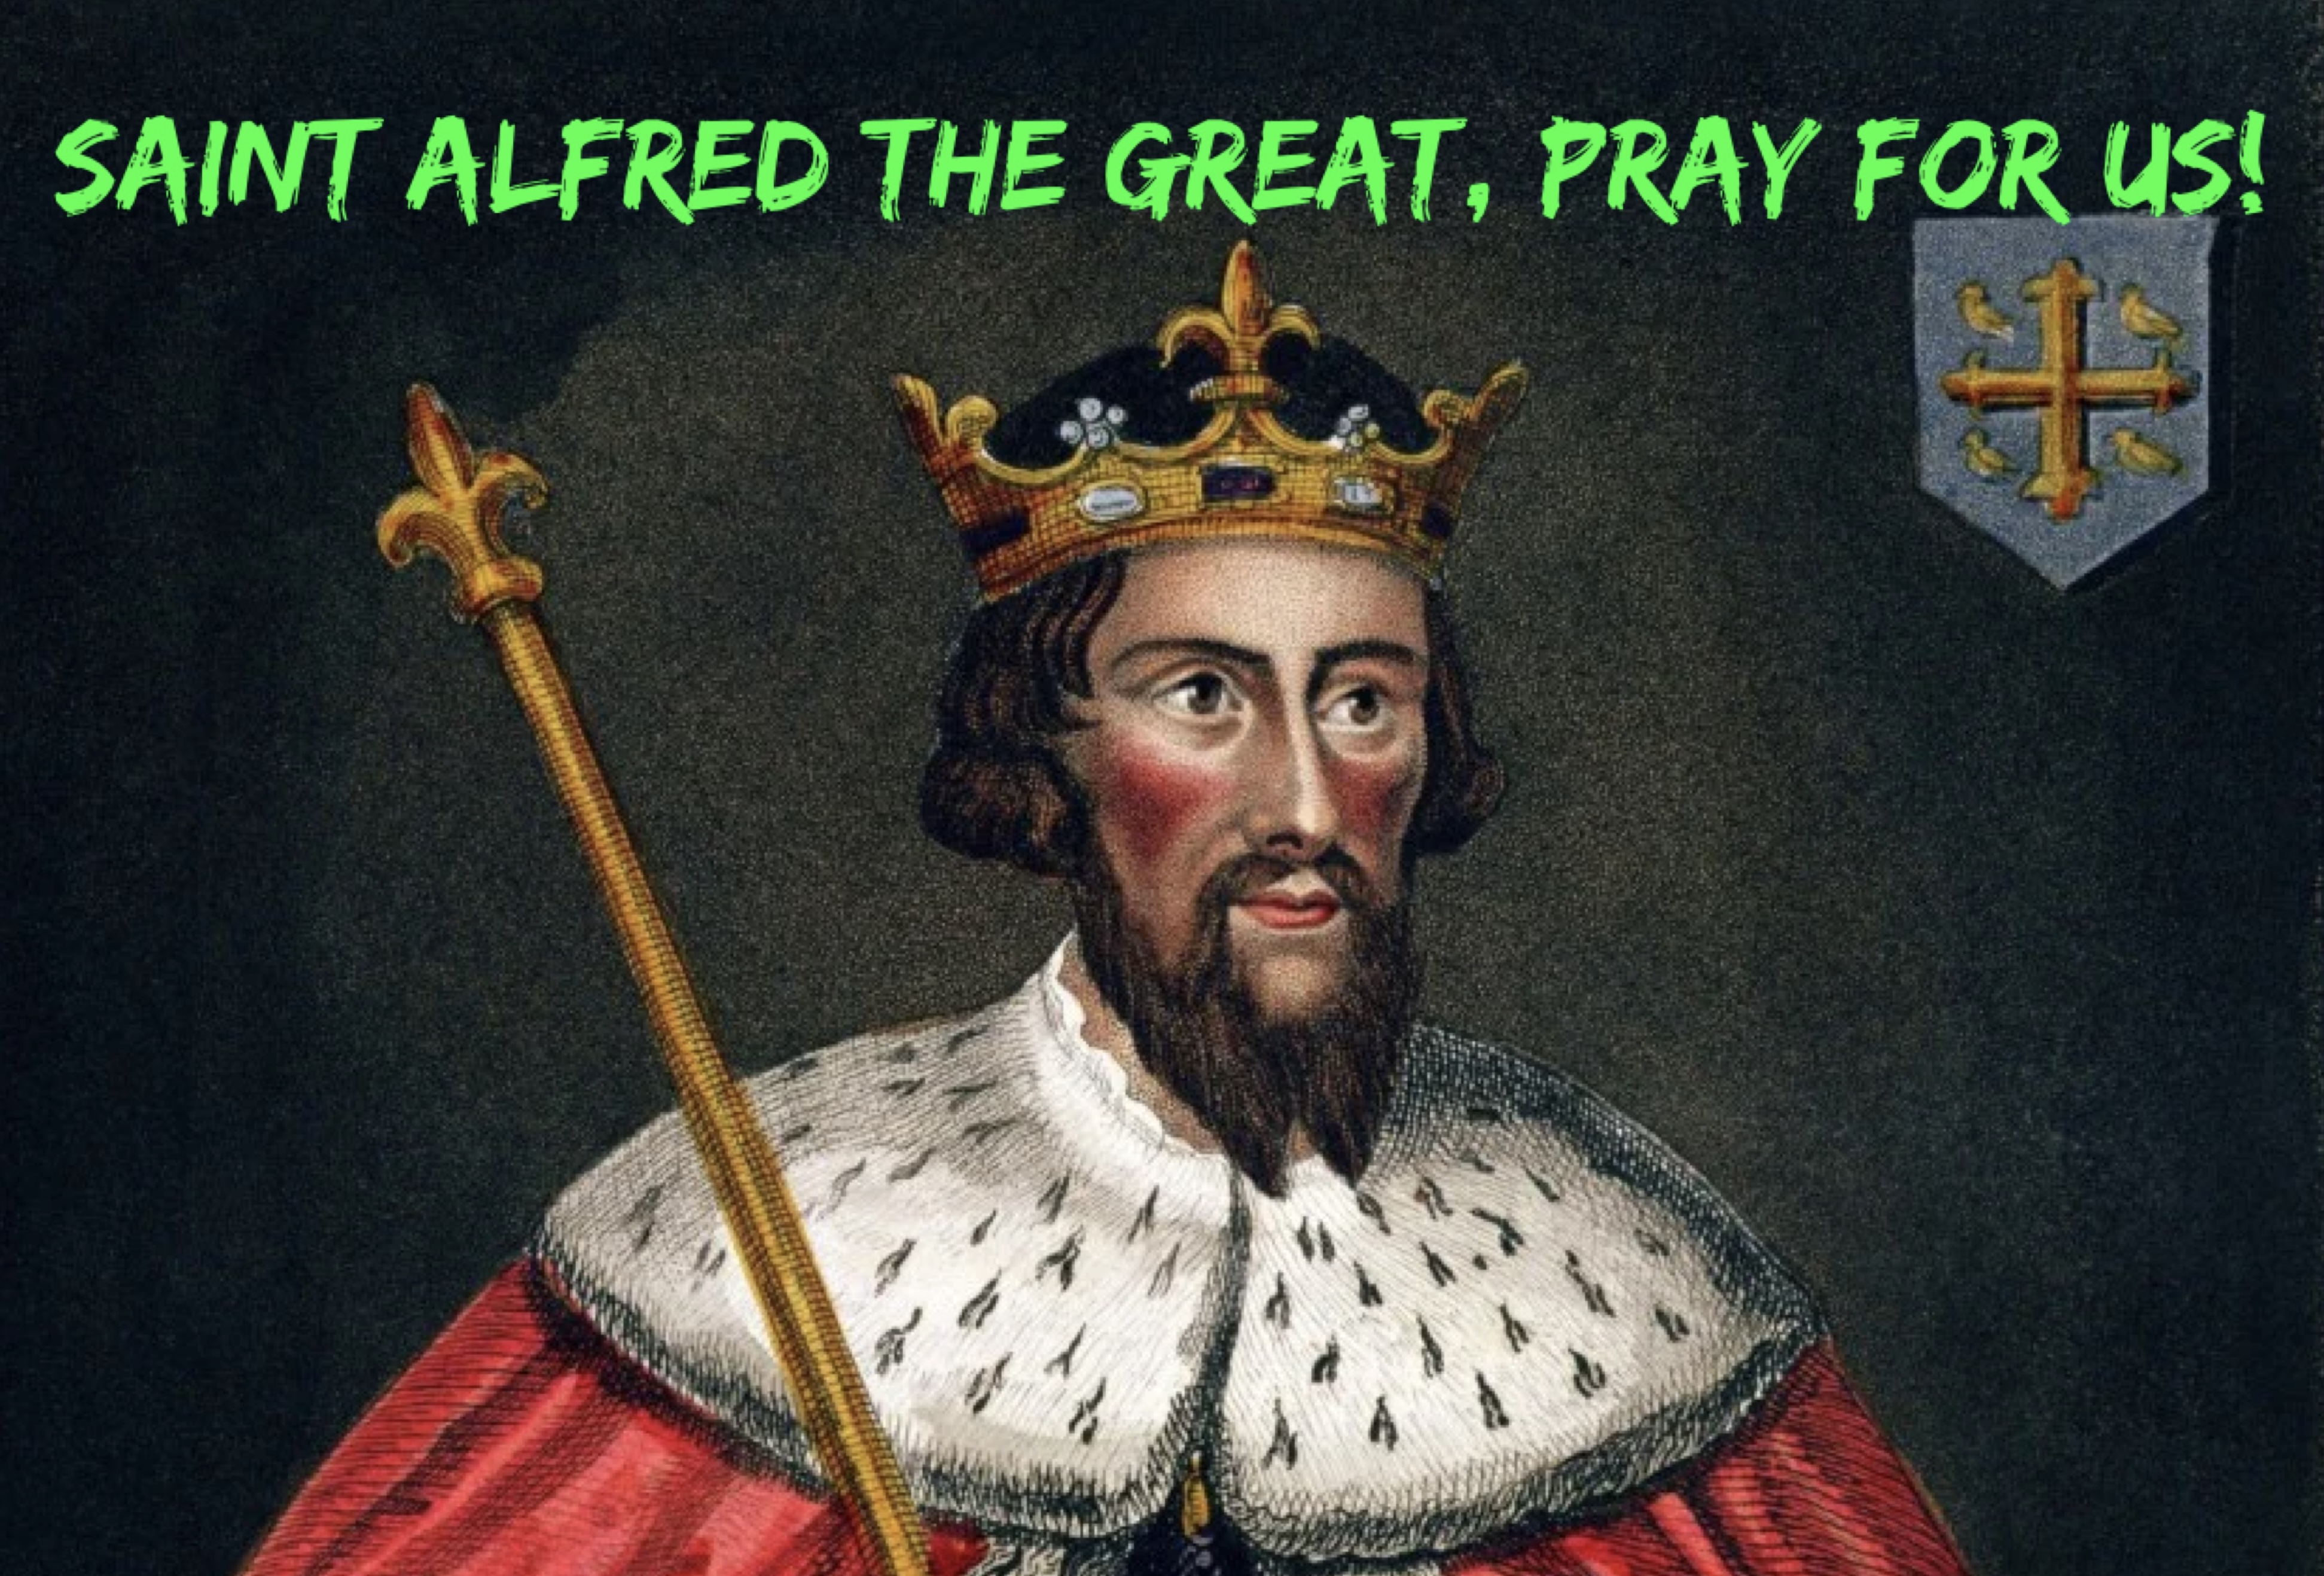 26th October – Saint Alfred the Great